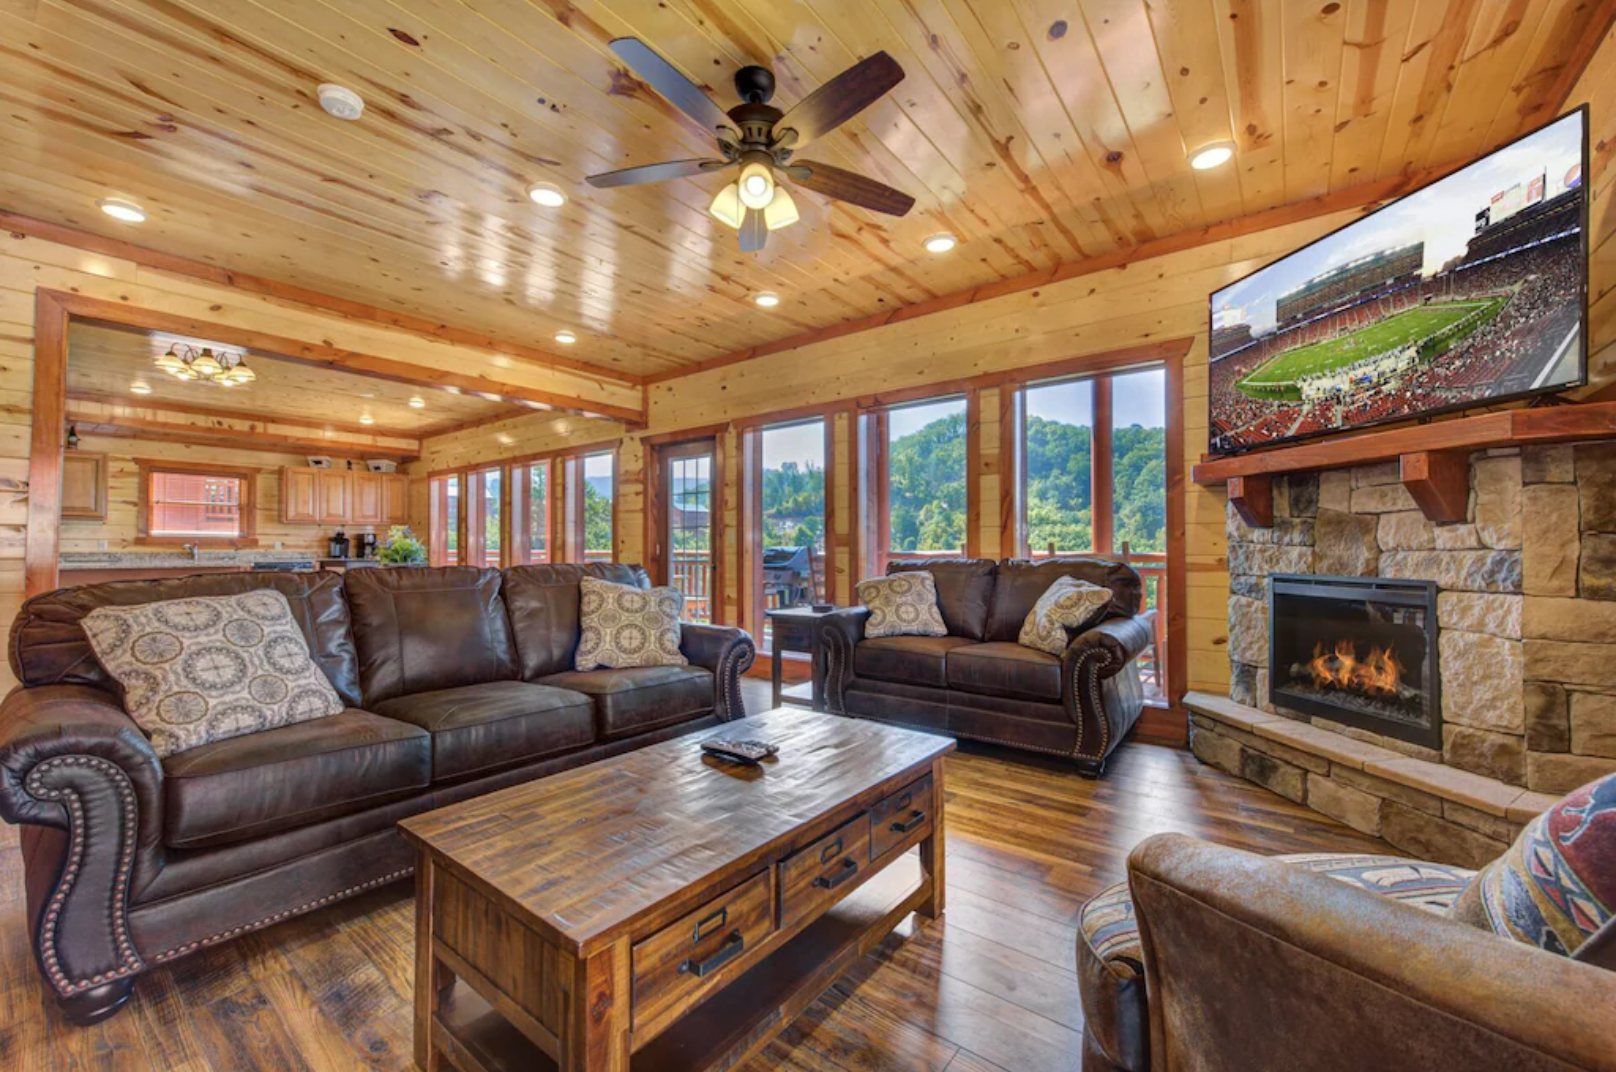 Vacation Home Rentals in the Great Smoky Mountains